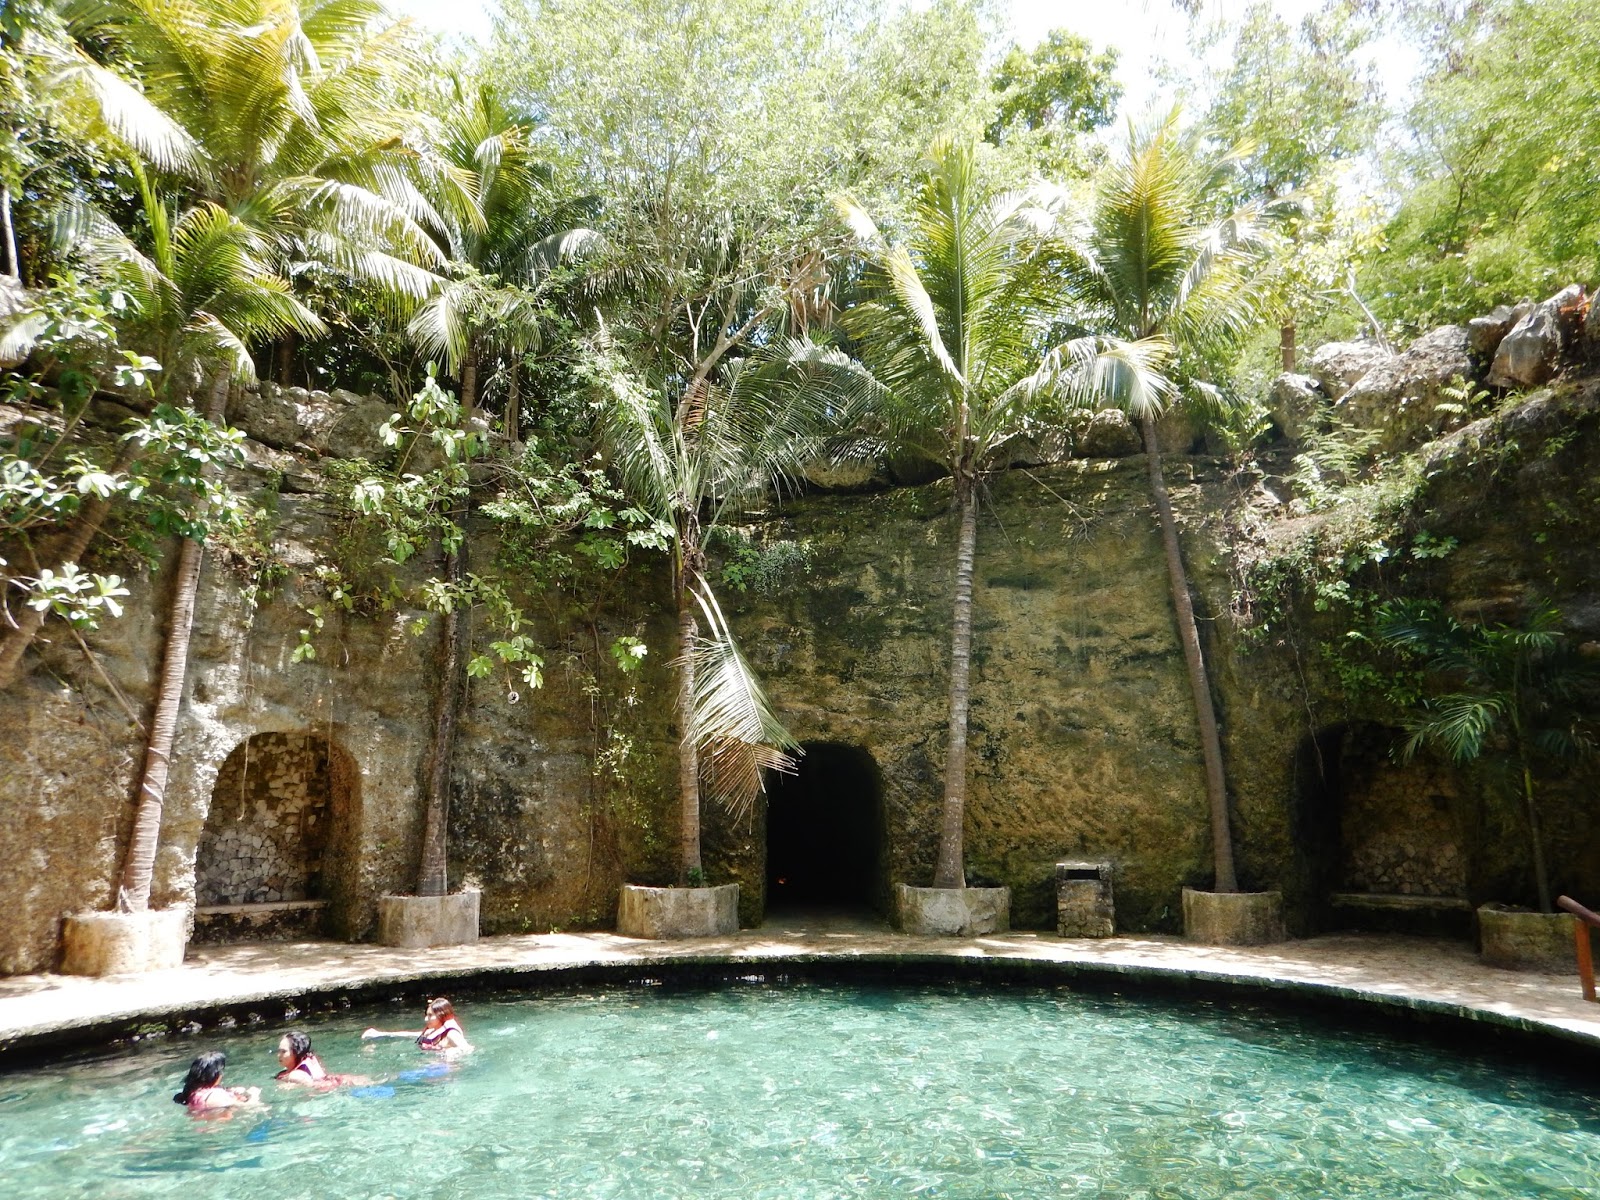 The Underground Rivers of Xcaret